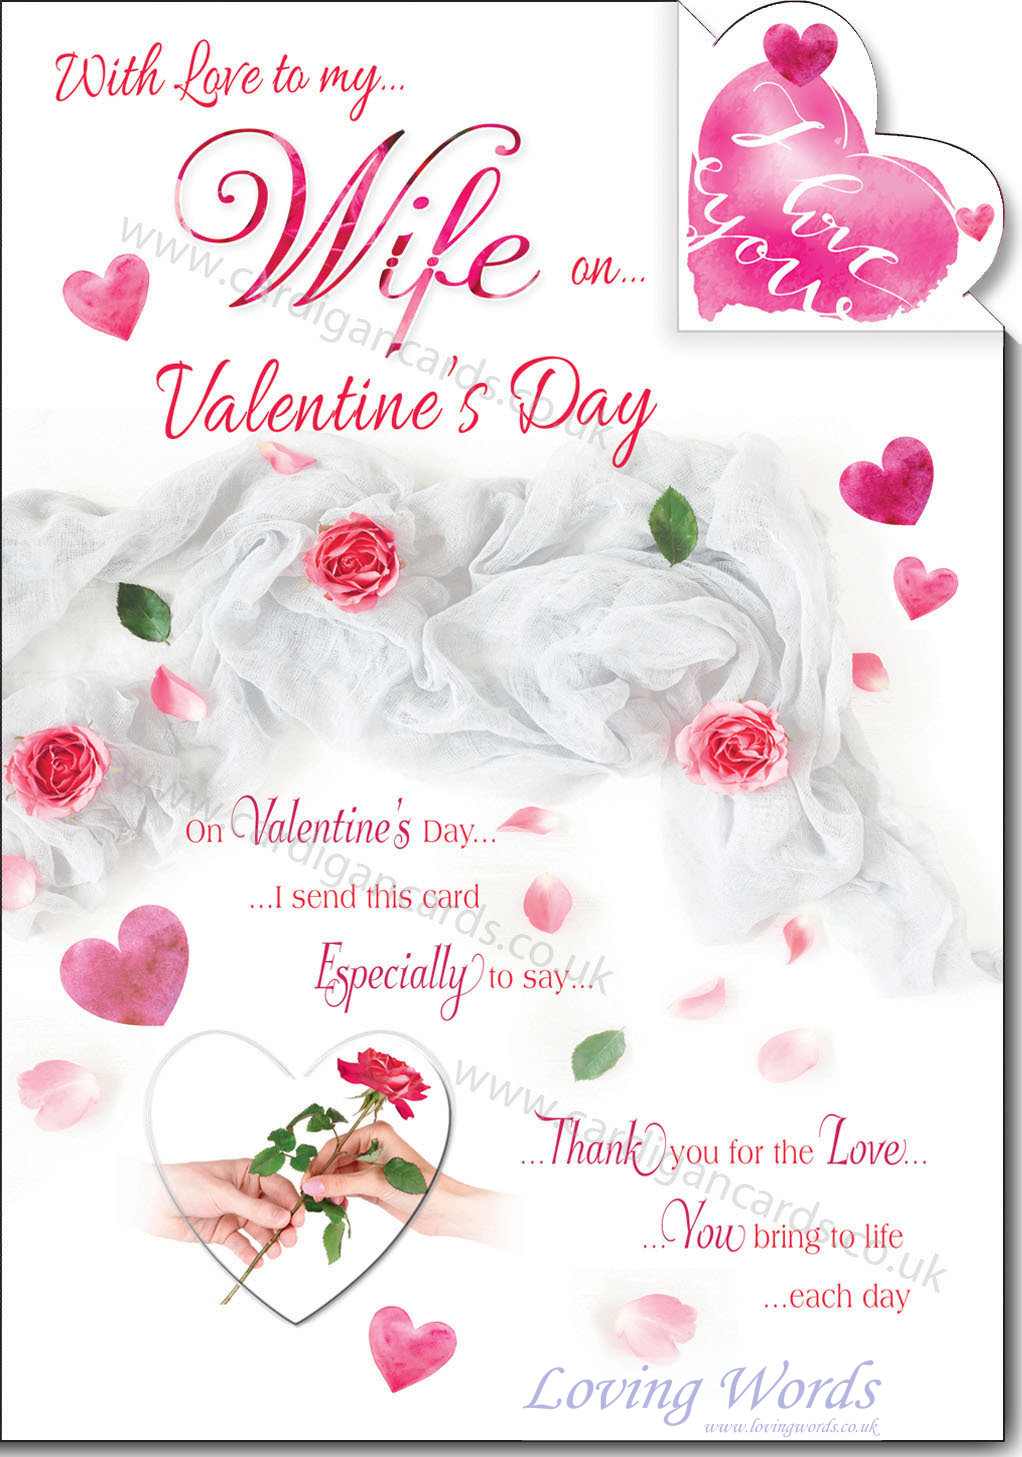 you-amaze-me-valentine-s-day-card-for-wife-greeting-cards-hallmark